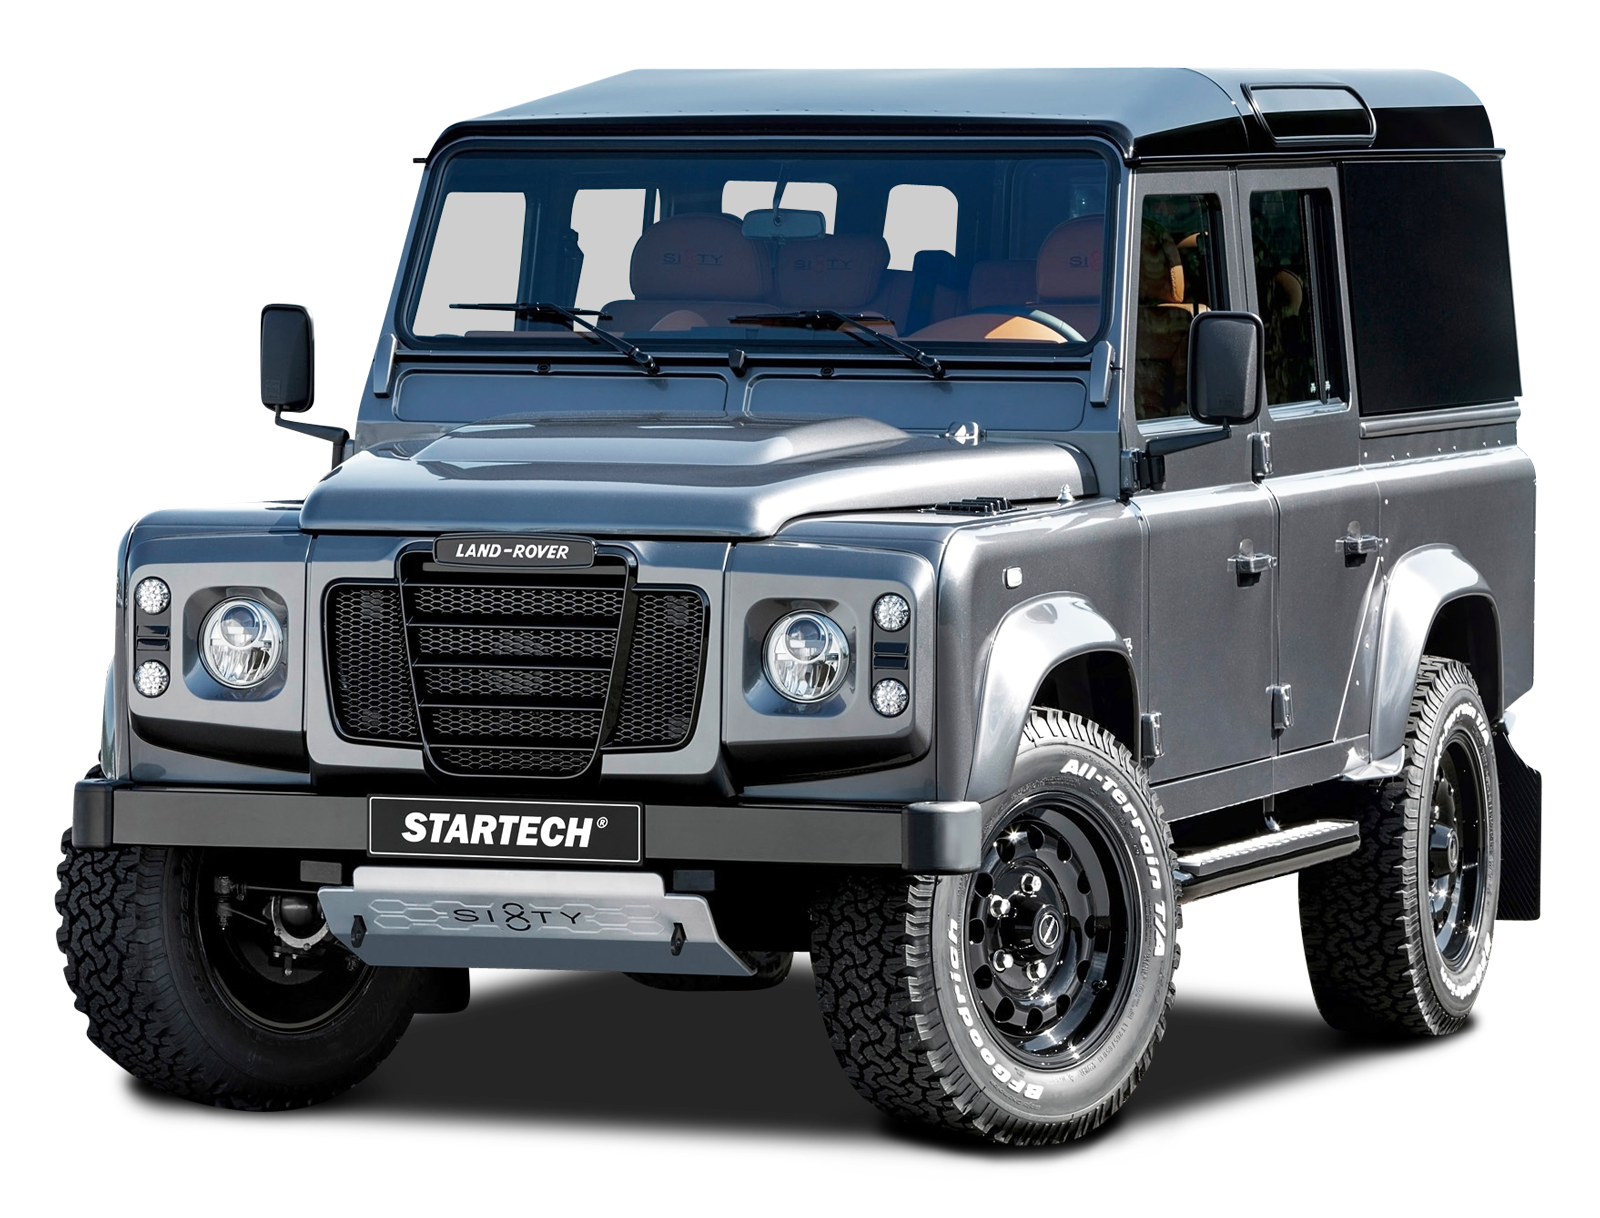 Sports Land Rover PNG High Quality Image